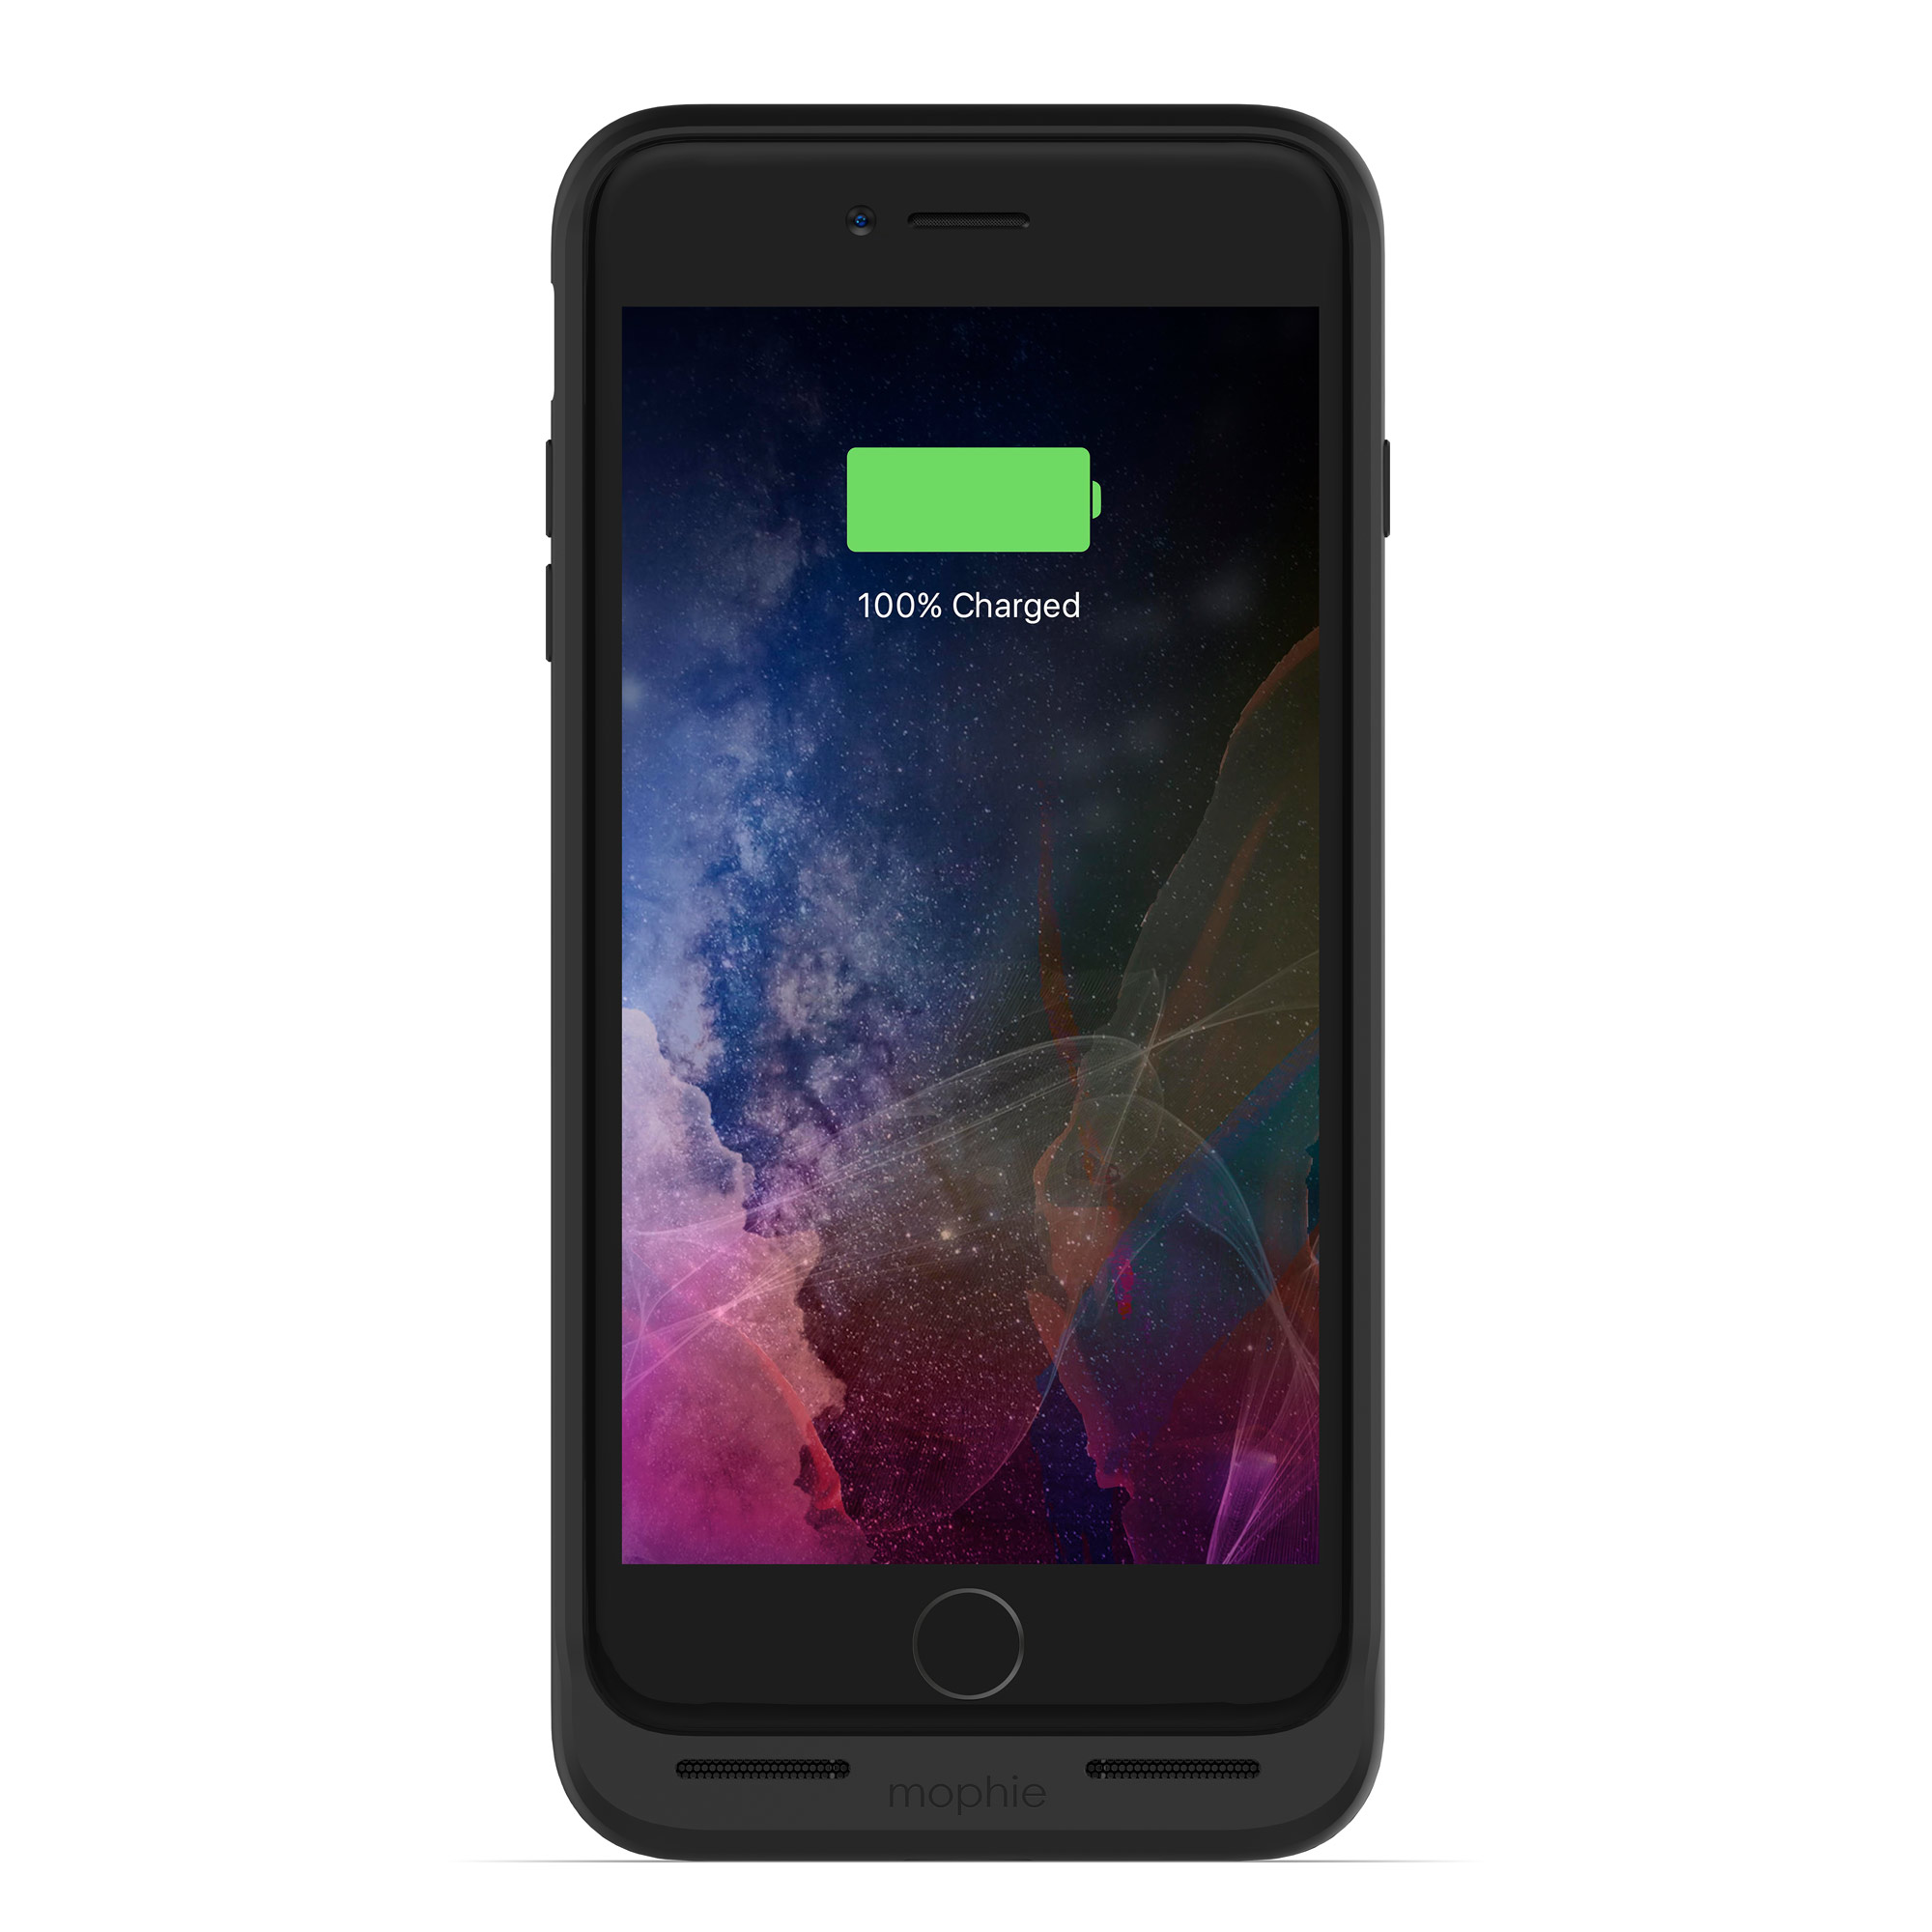 mophie juice pack air for iPhone 8 Plus/7 Plus | SHOP FOCAL